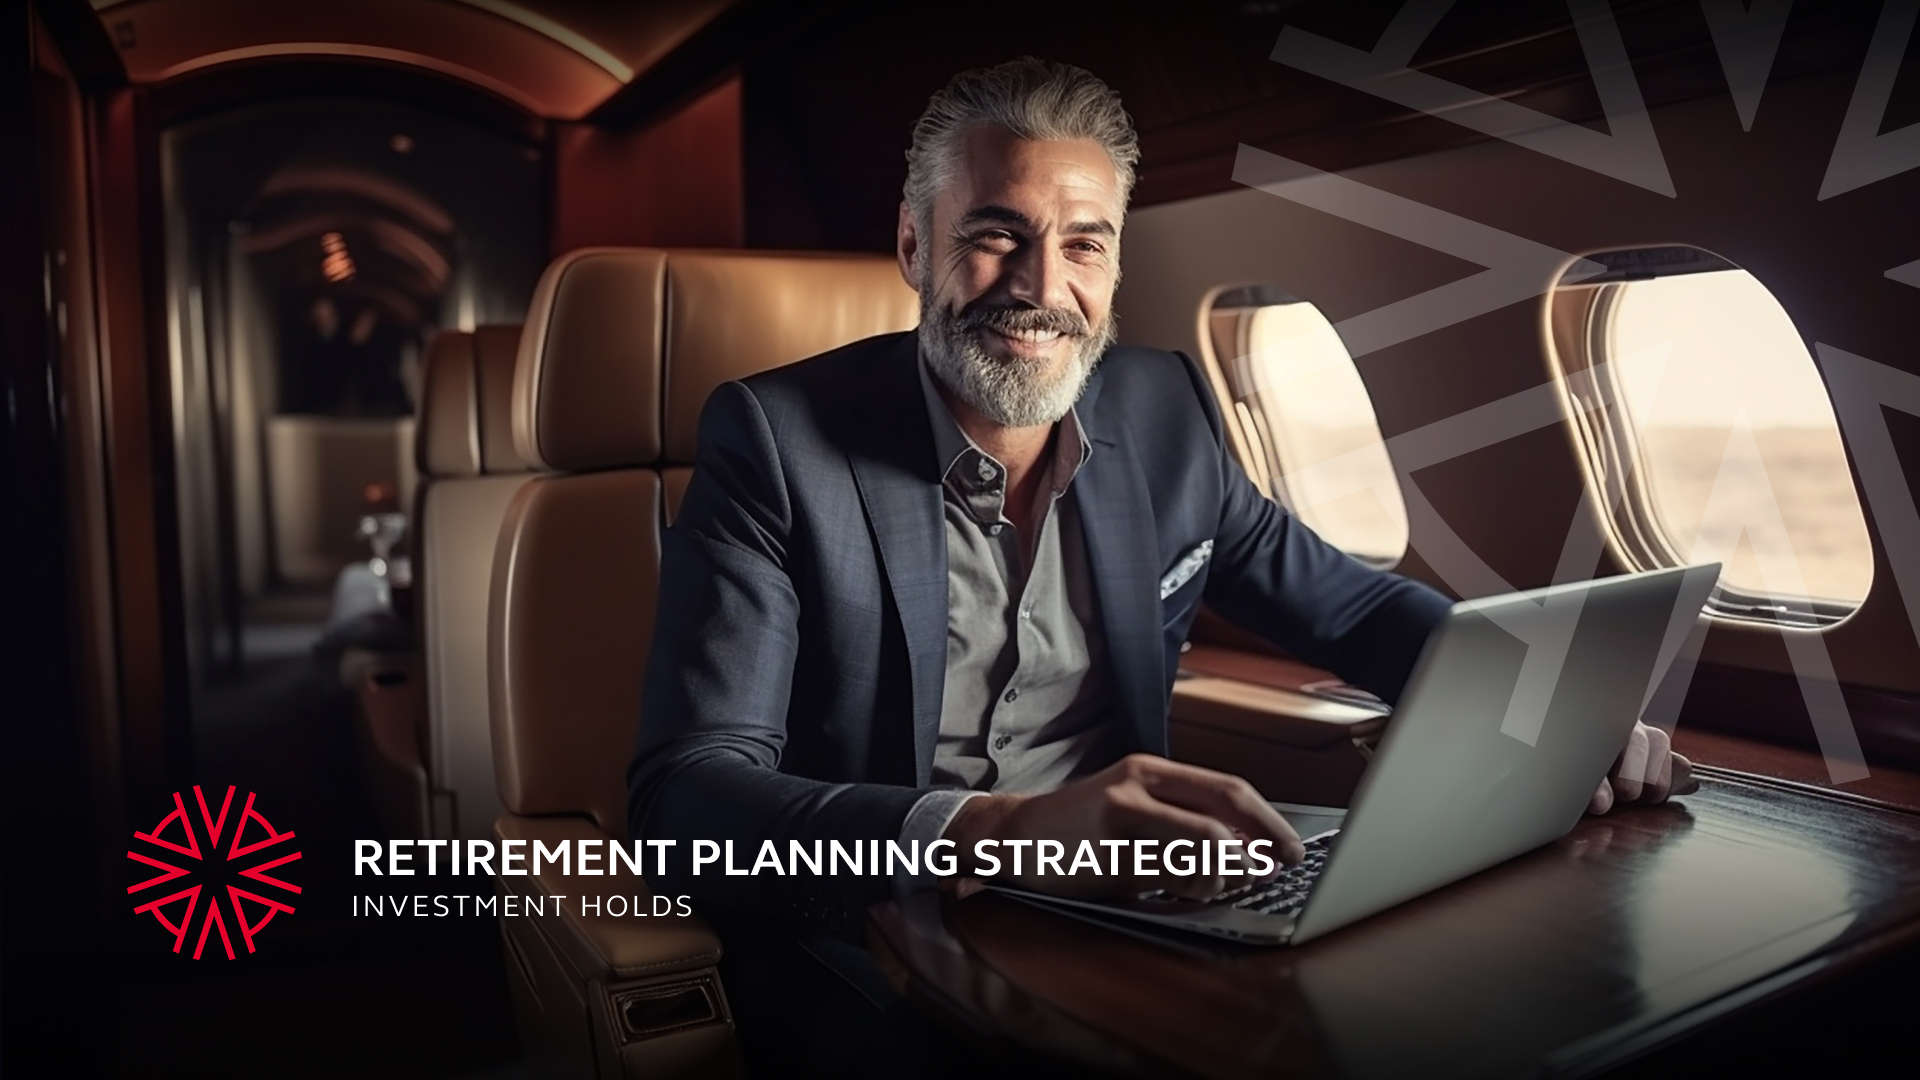 An older gentlemen on a private jet in front of his laptop working on his retirement planning goals